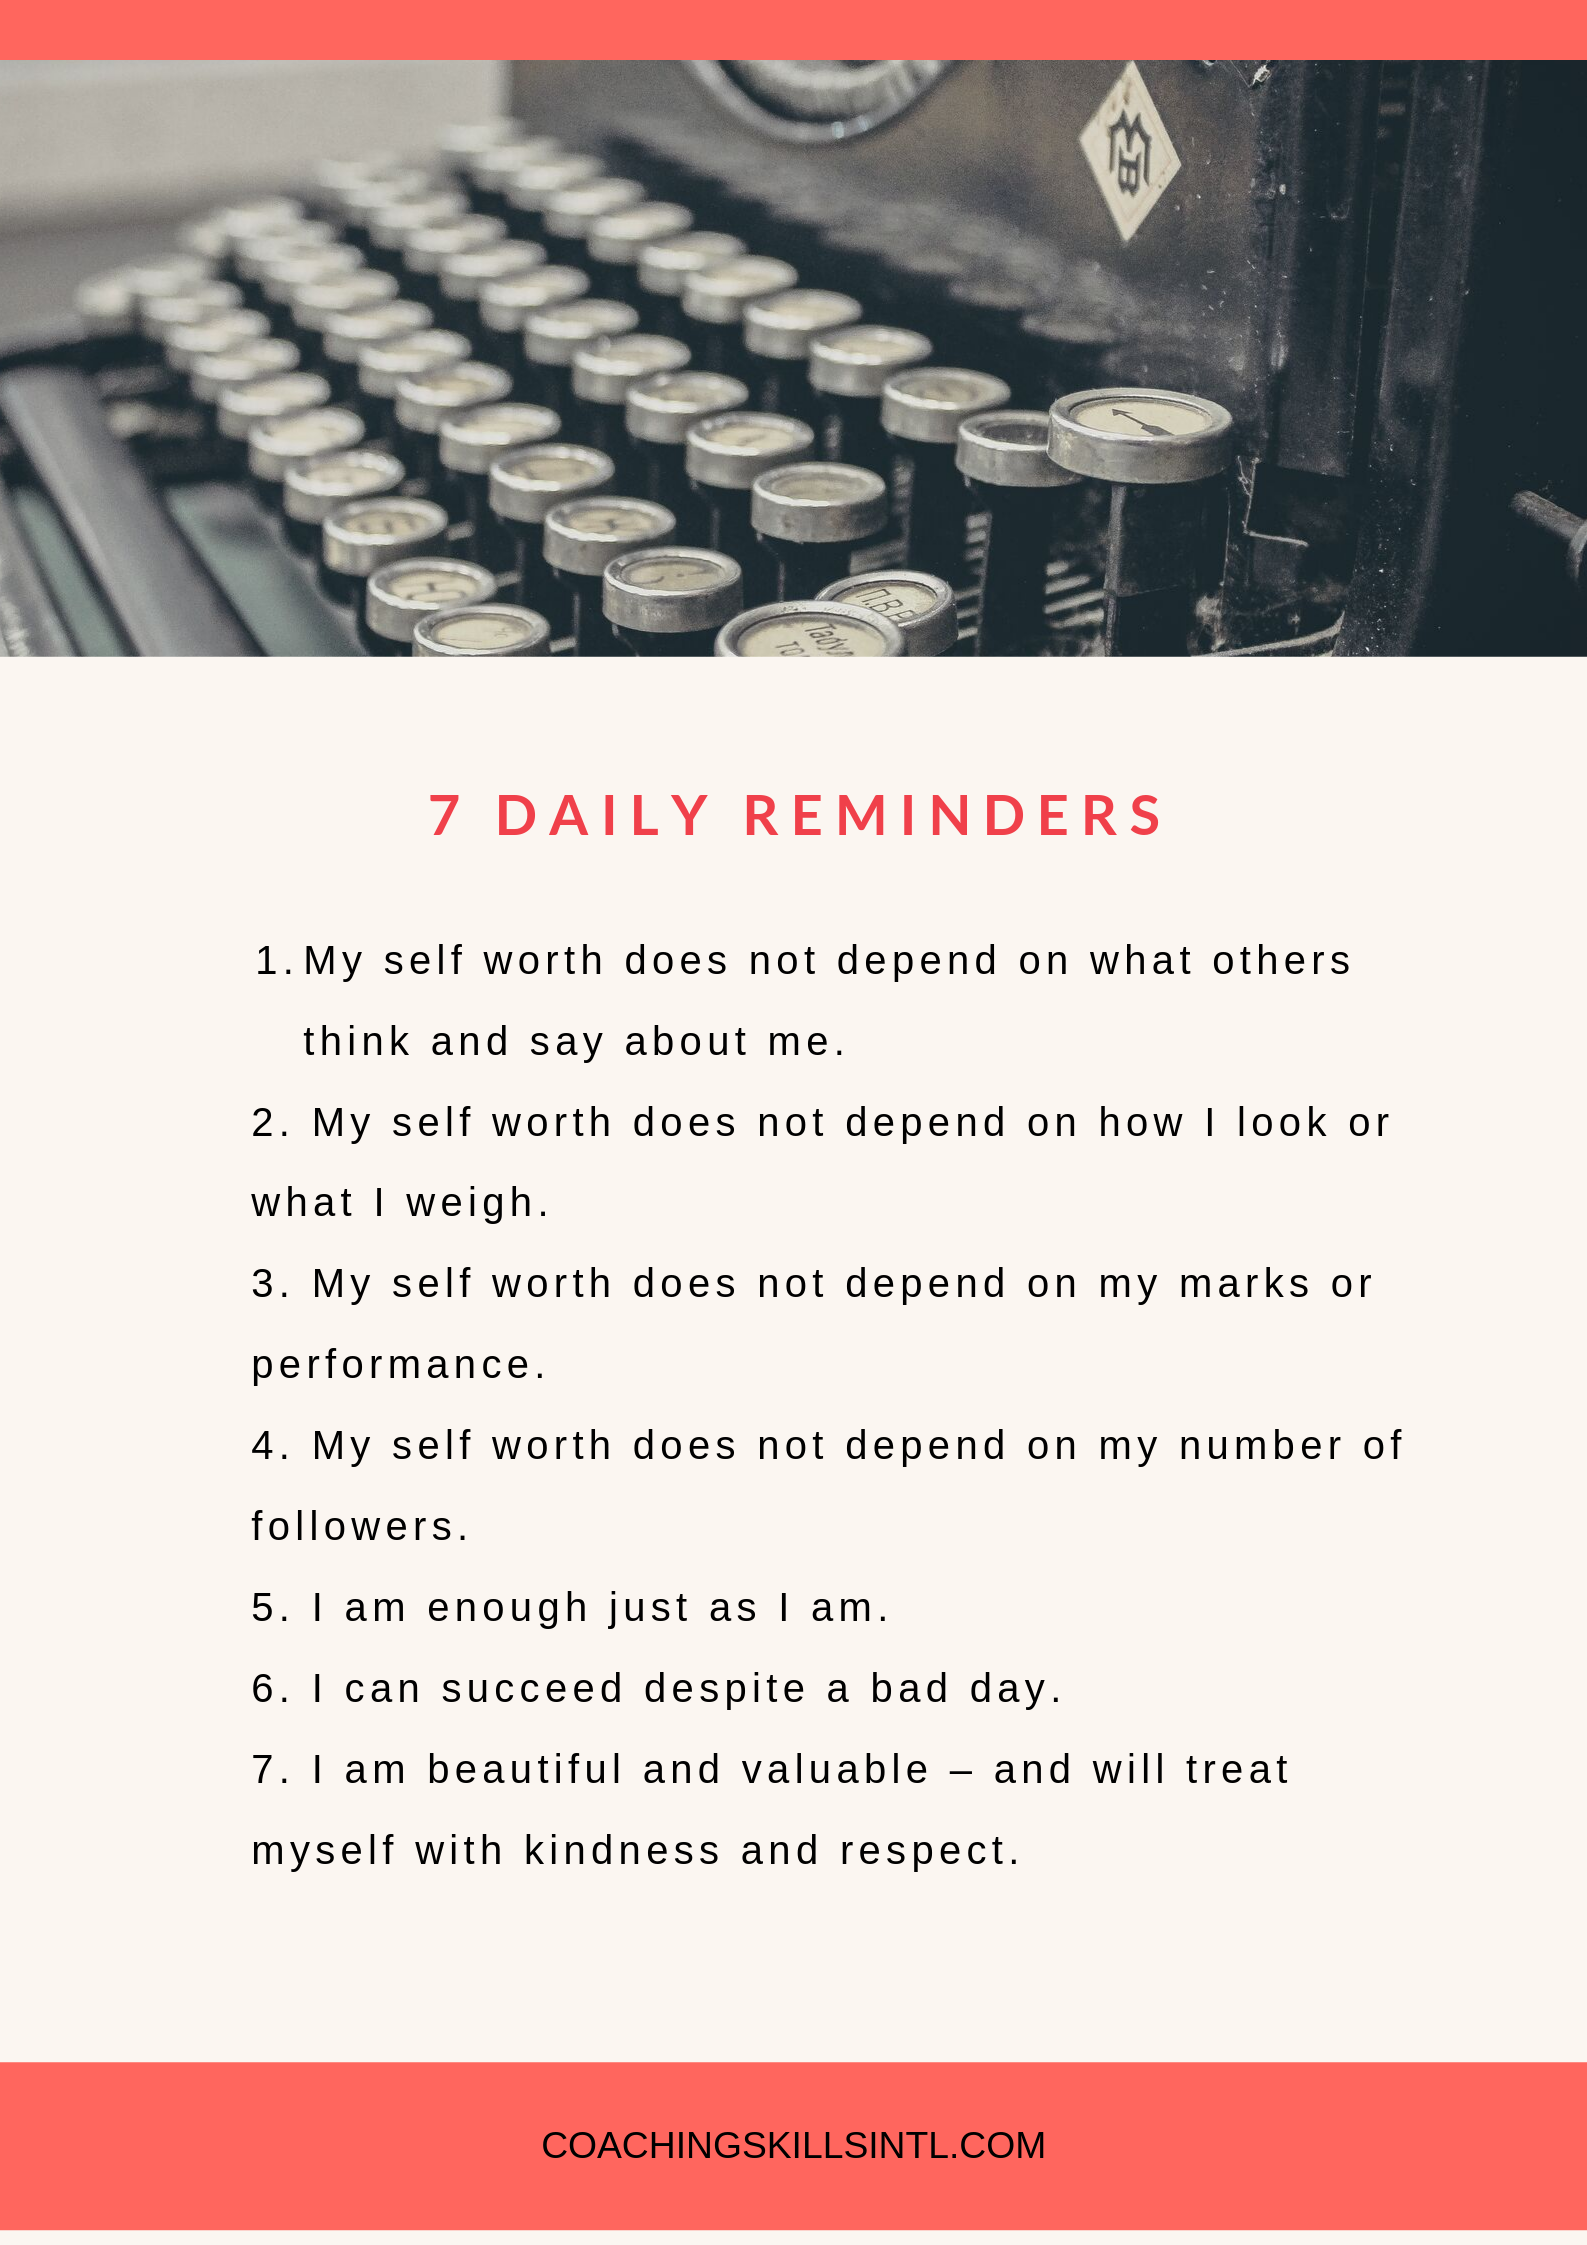 7 daily reminders.png